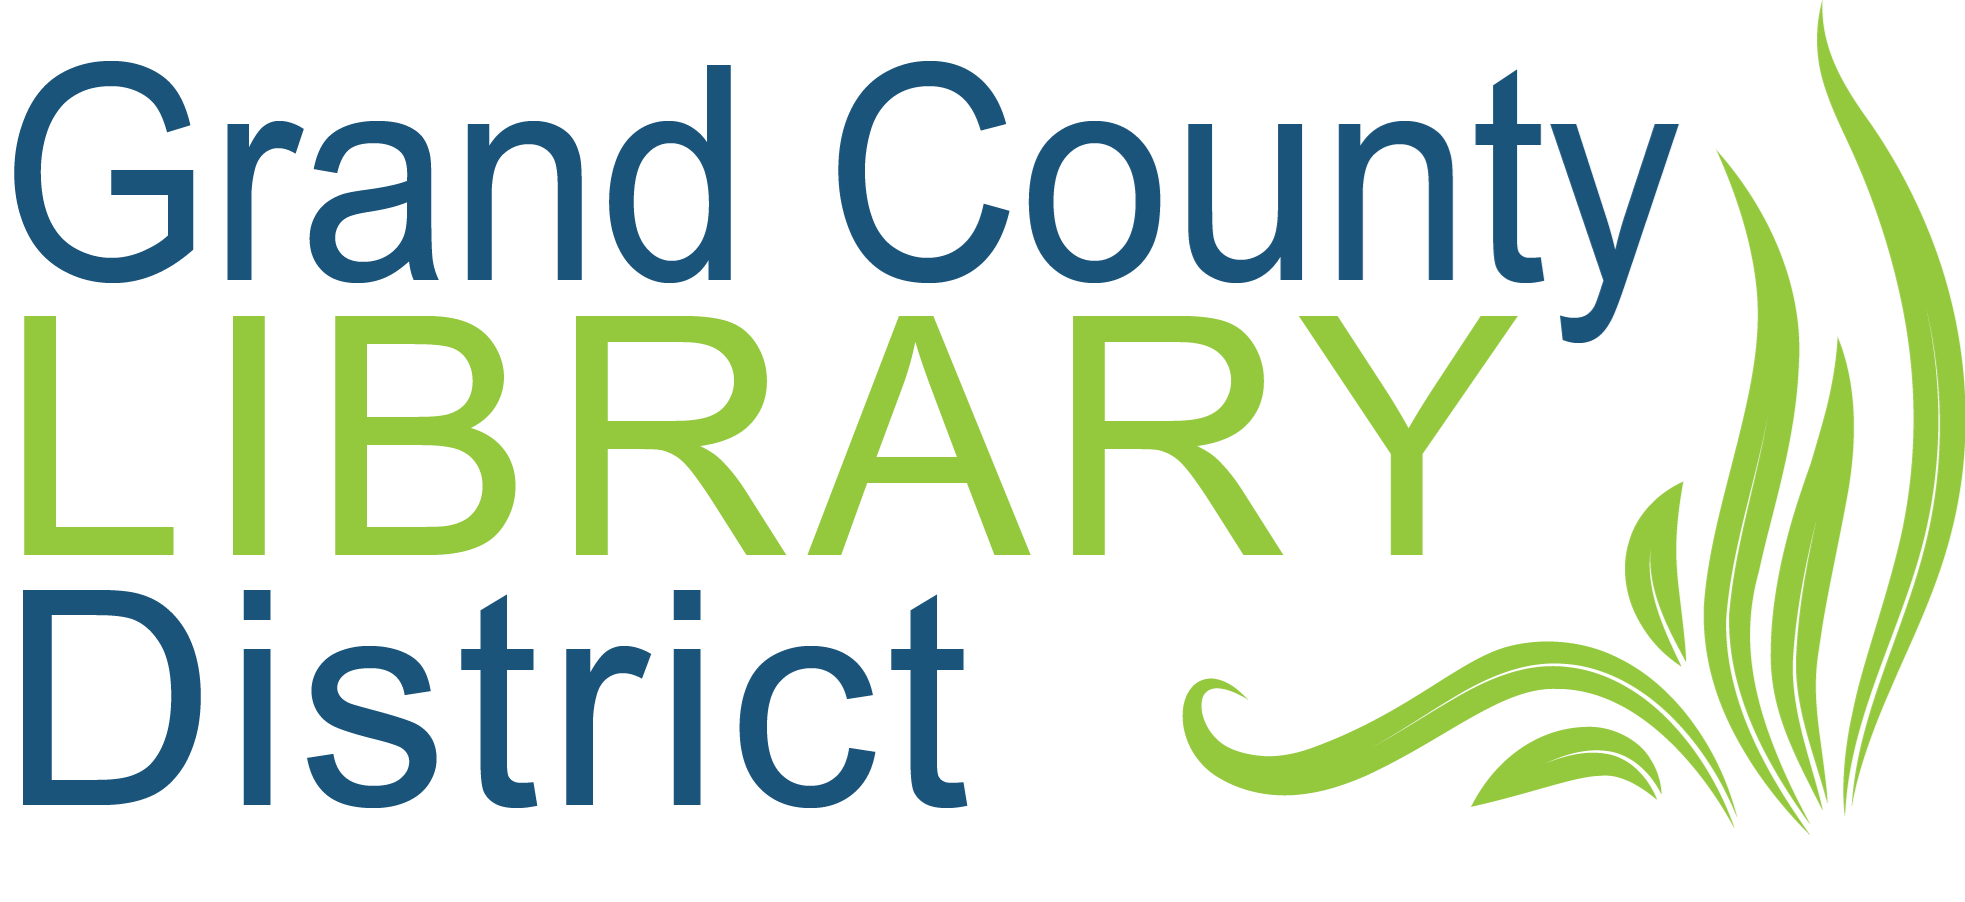 Grand County Library District